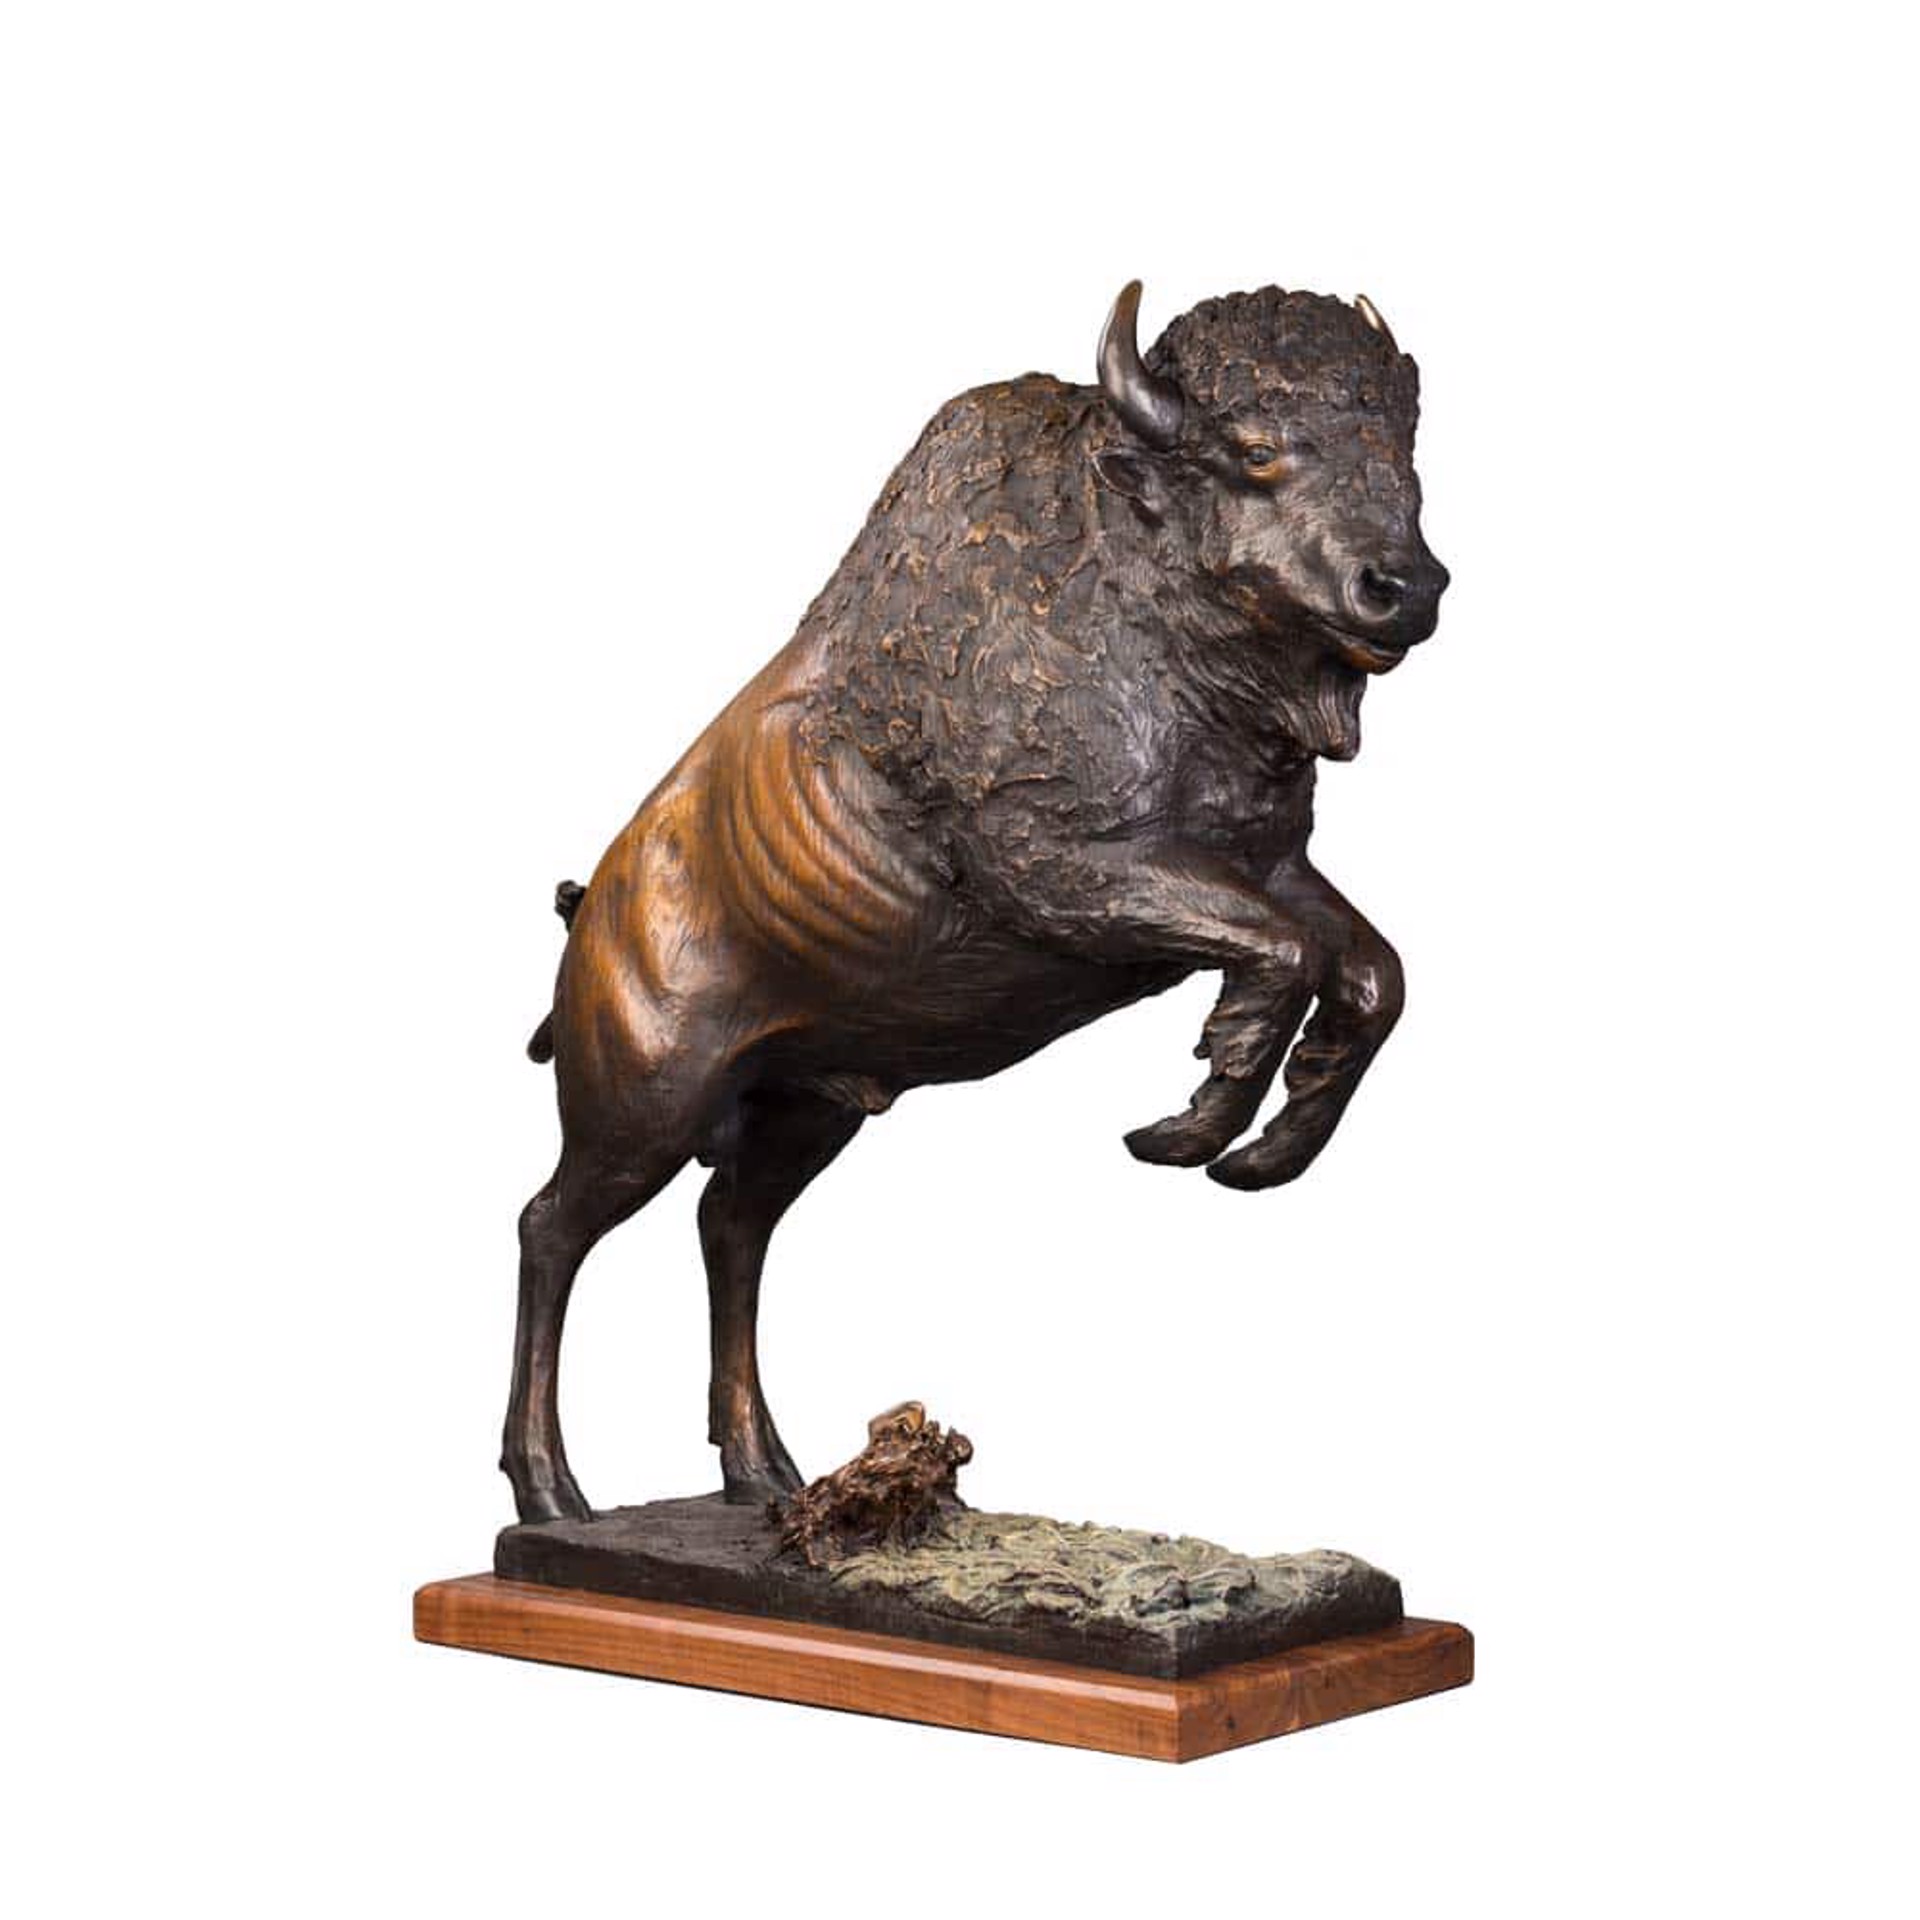 Bison Original Bronze Sculpture by Rip and Alison Caswell, Contemporary Fine Art, Modern Wildlife Art, Available At Gallery Wild